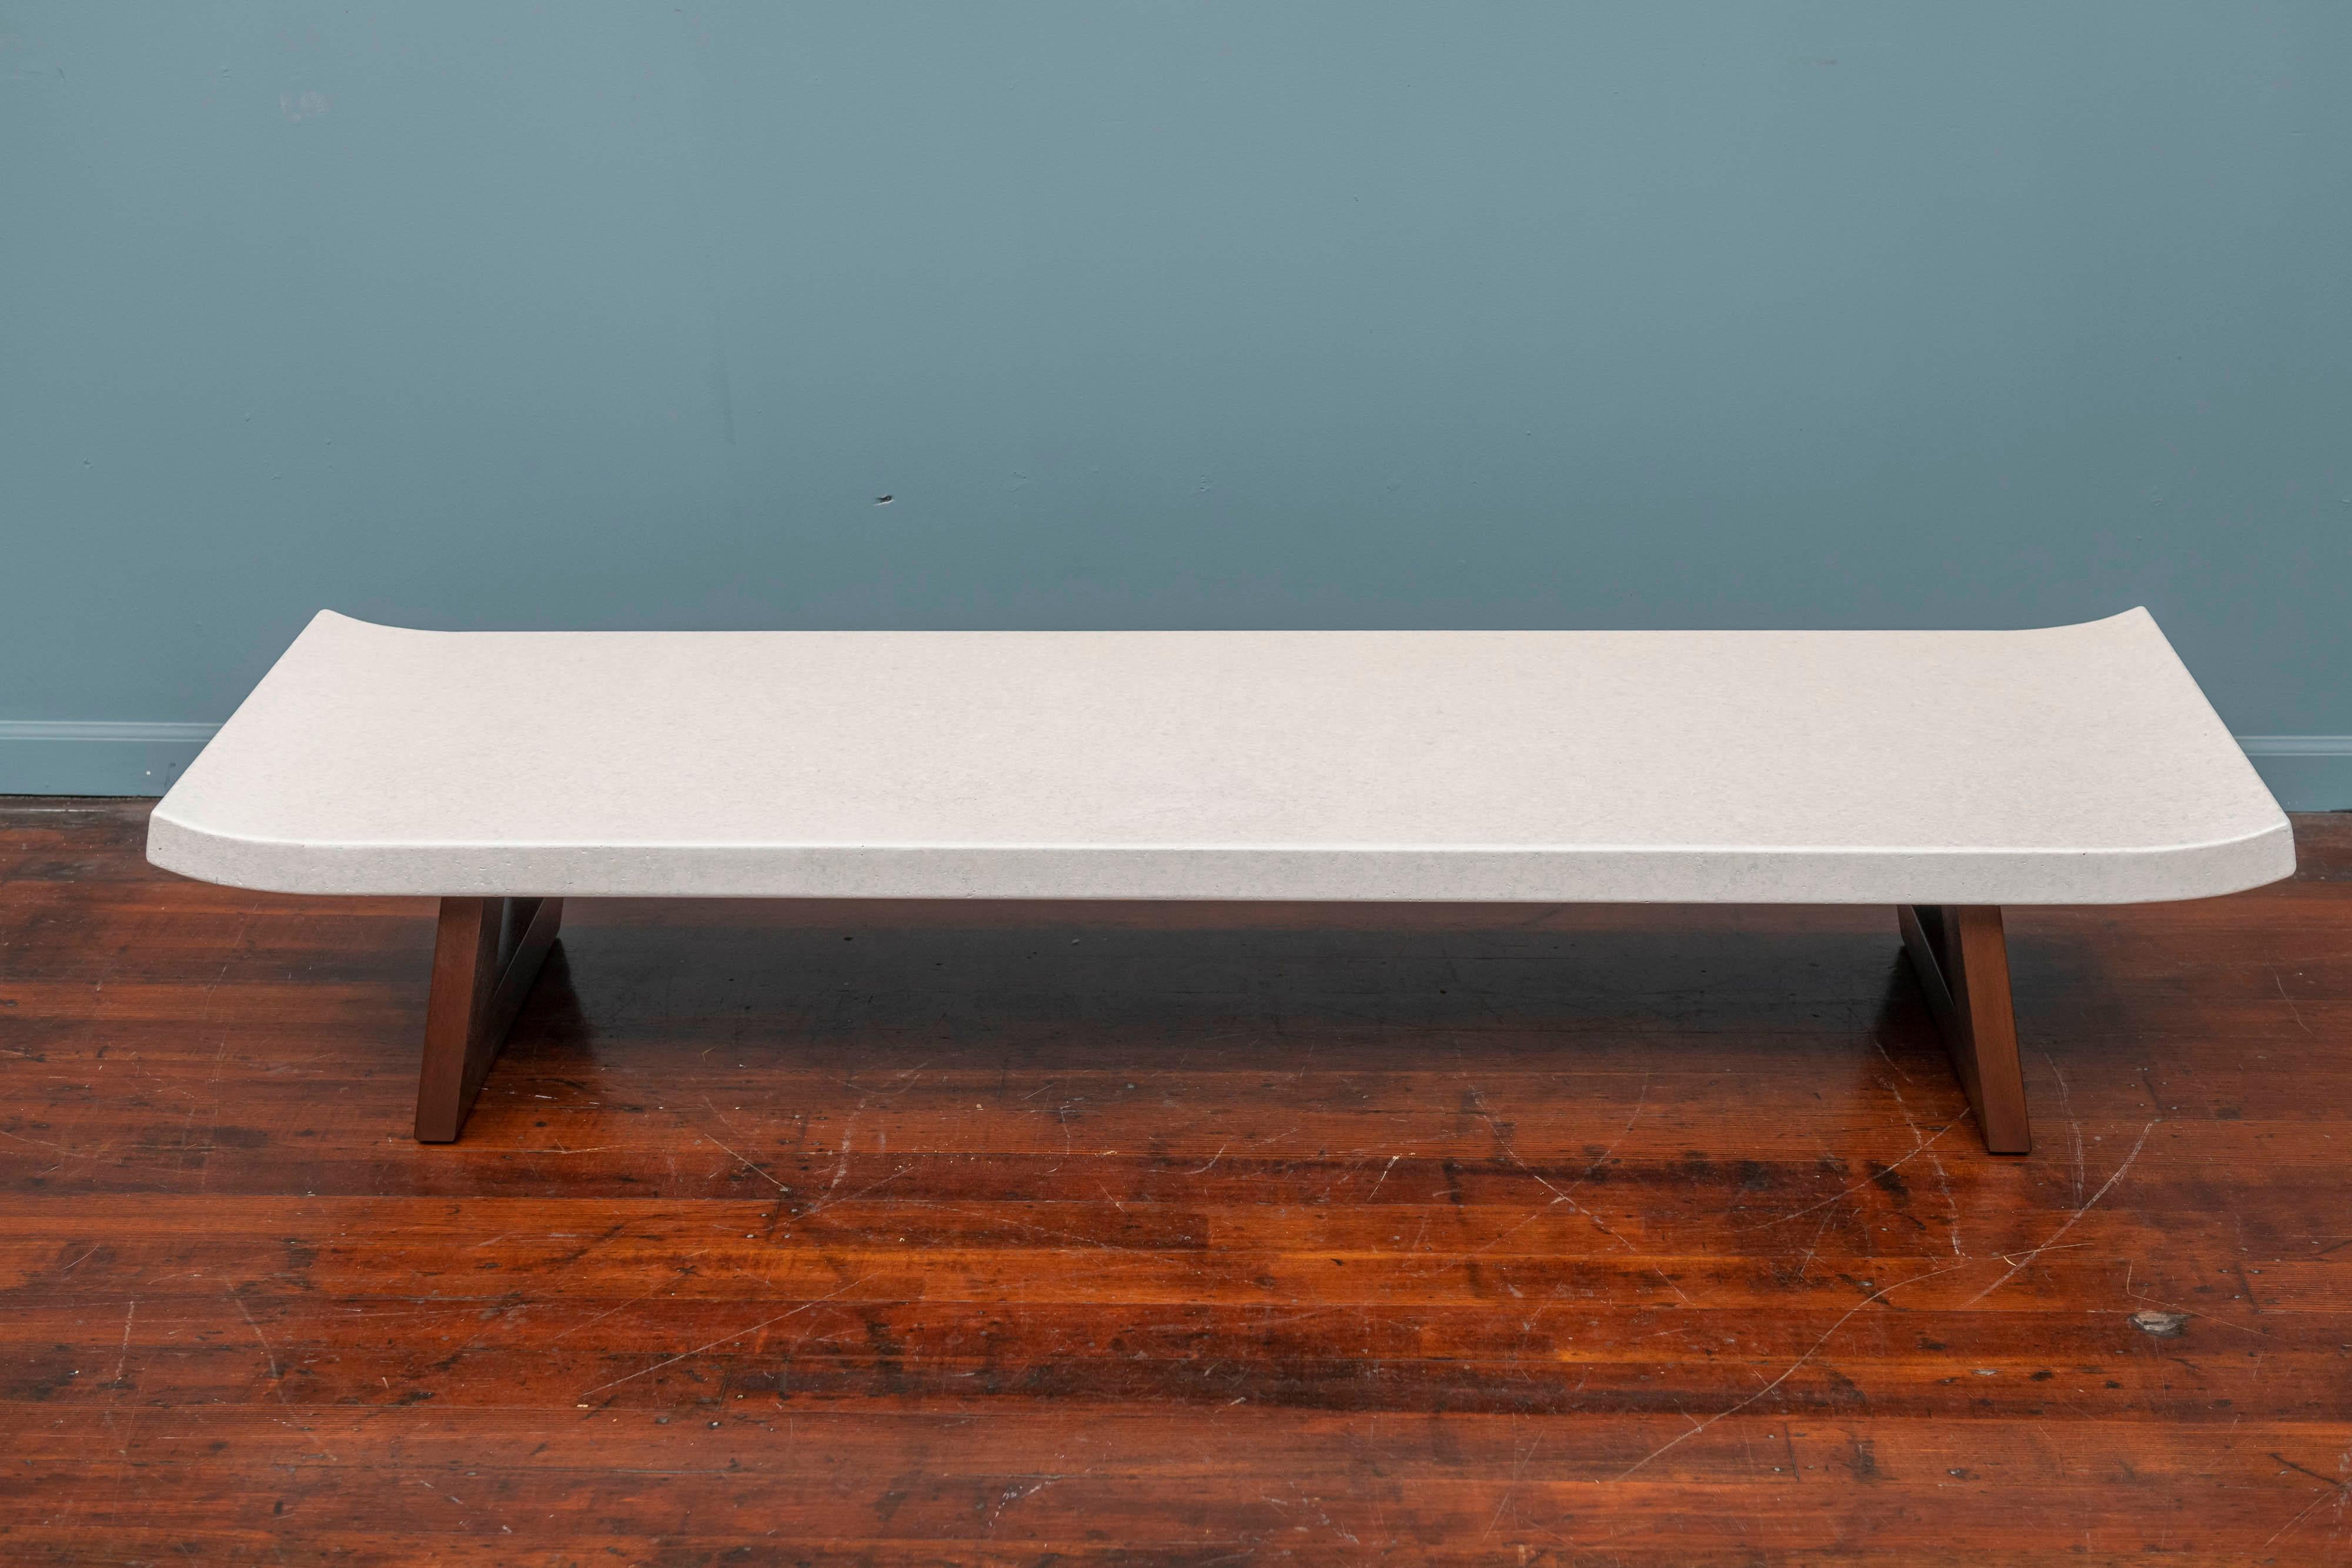 Paul Frankl design for Johnson Furniture co. cork top low table or bench, Model 5004. Influenced by Japanese architecture and made with a pierced mahogany base and a cork veneered top.
Perfectly refinished and ready to install.